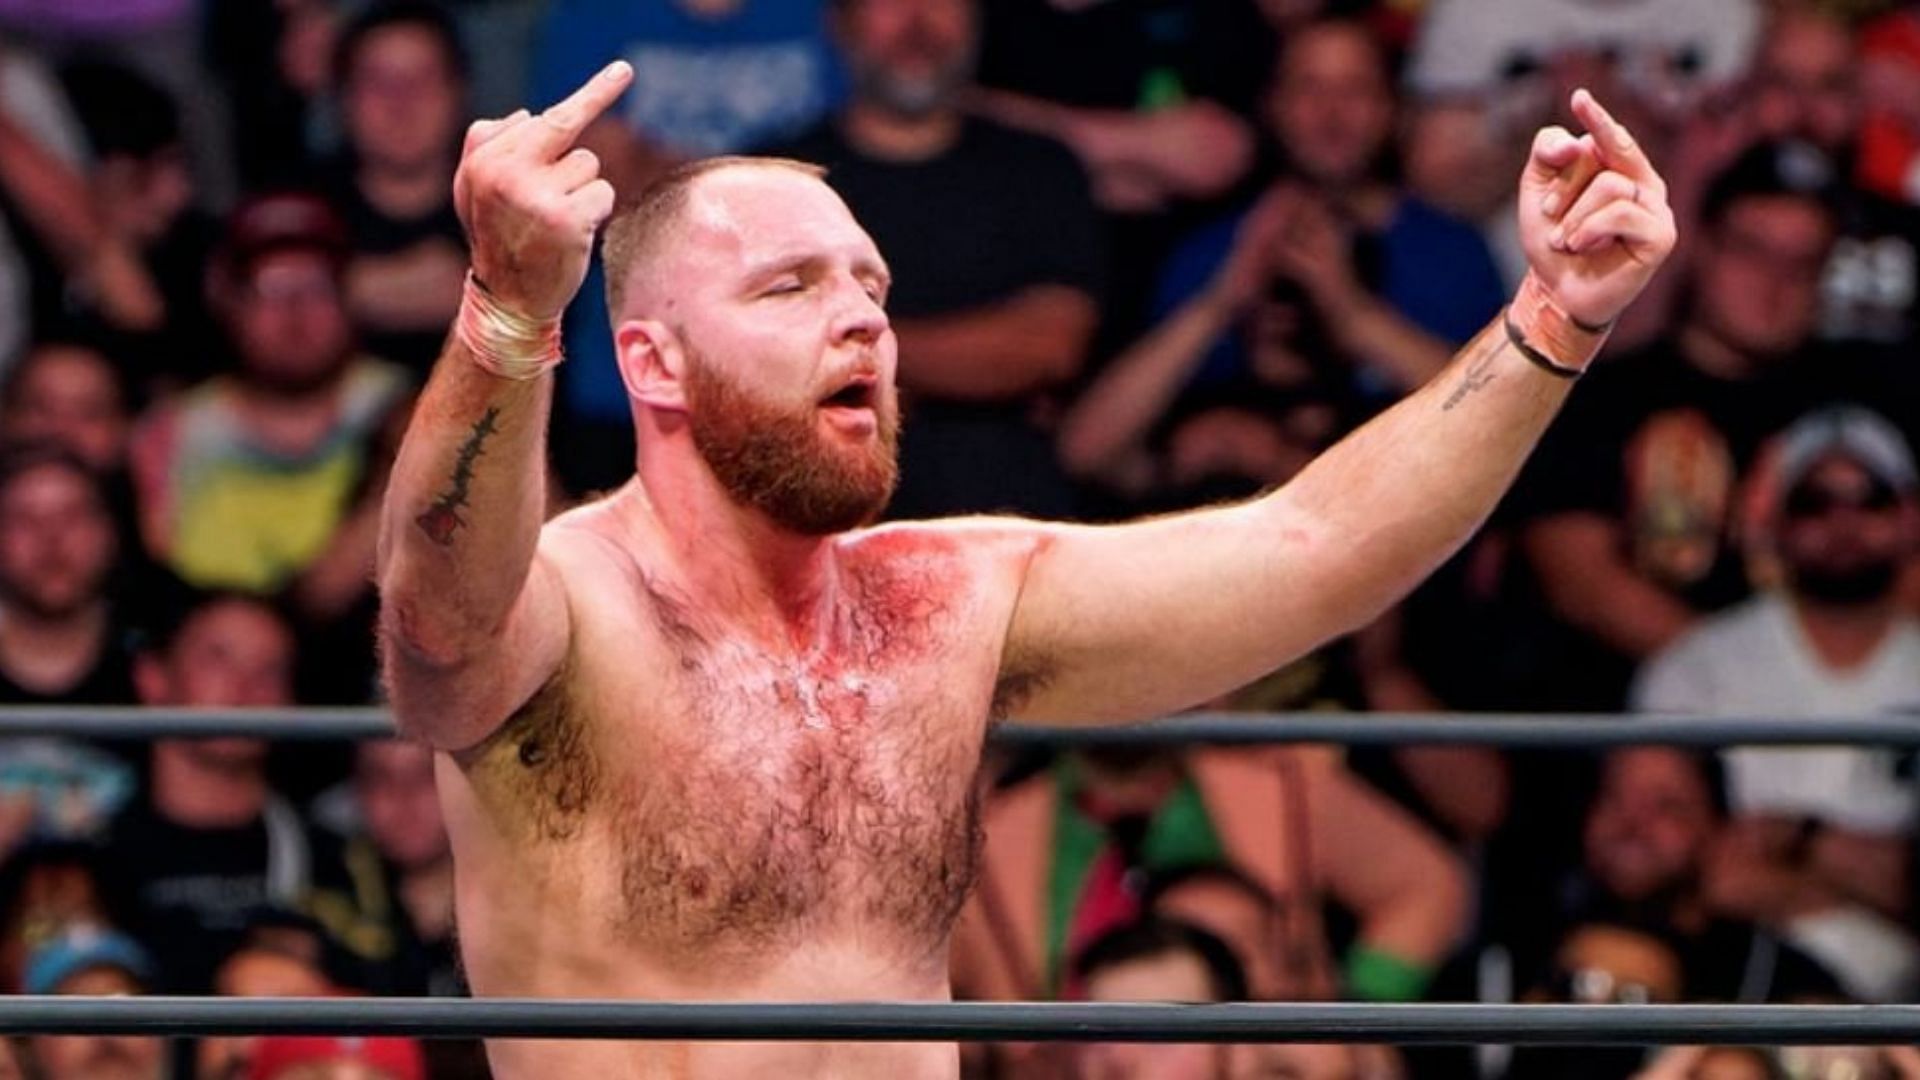 Jon Moxley is a former three-time AEW World Champion